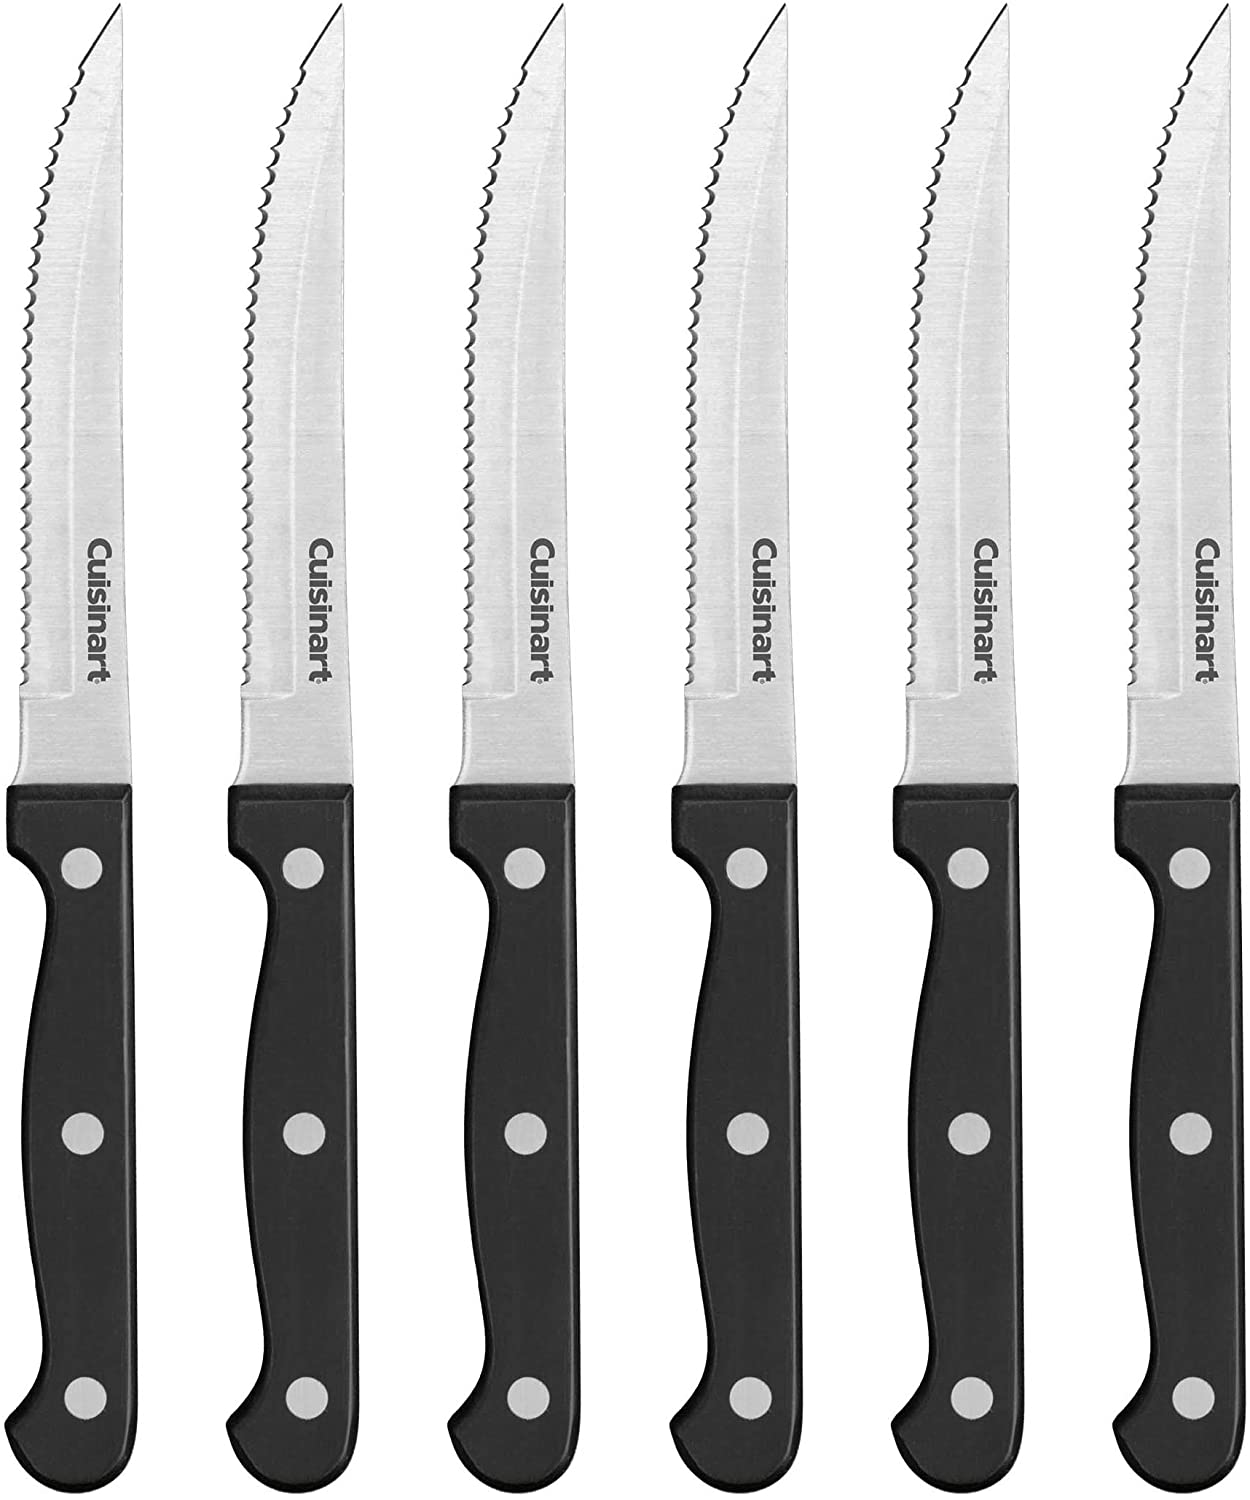 THE BEST STEAK KNIFE SETS FOR JUICY STEAK DISHES 2022